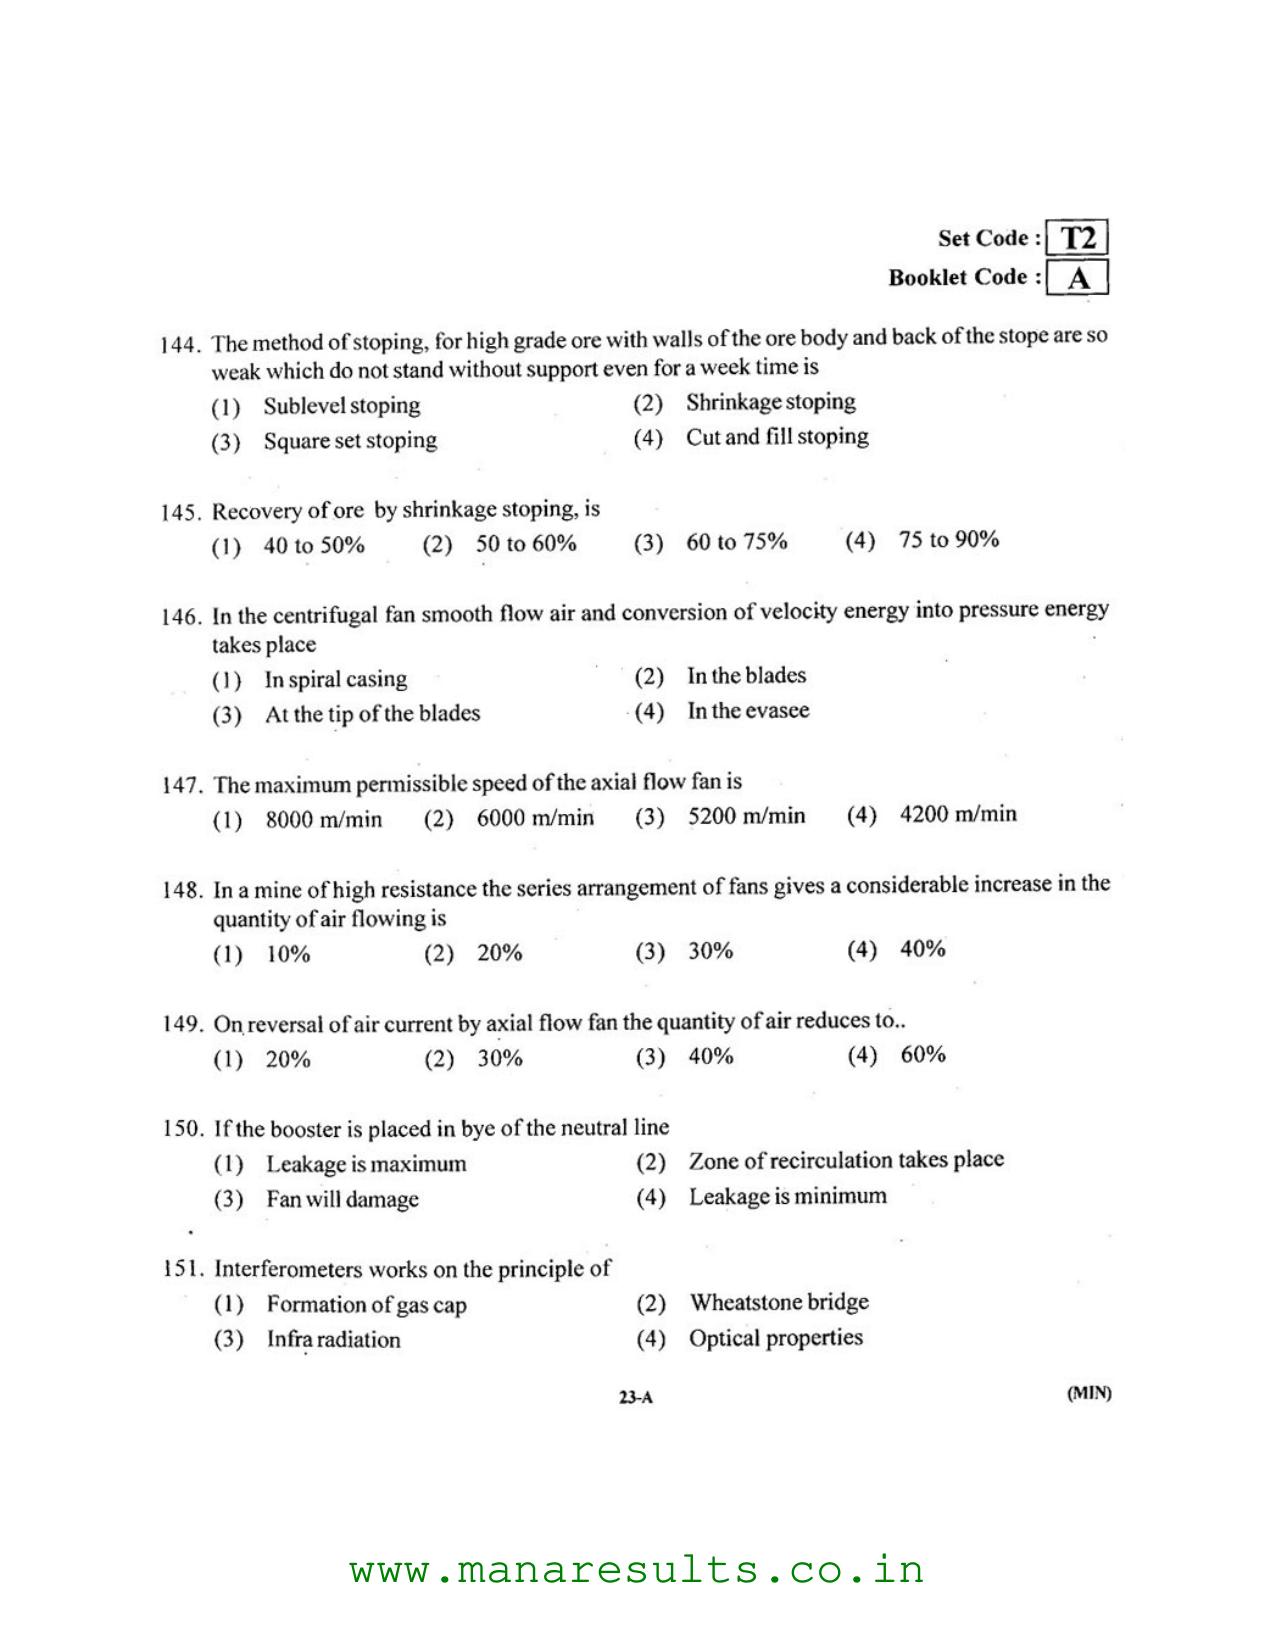 AP ECET 2016 Mining Engineering Old Previous Question Papers - Page 22